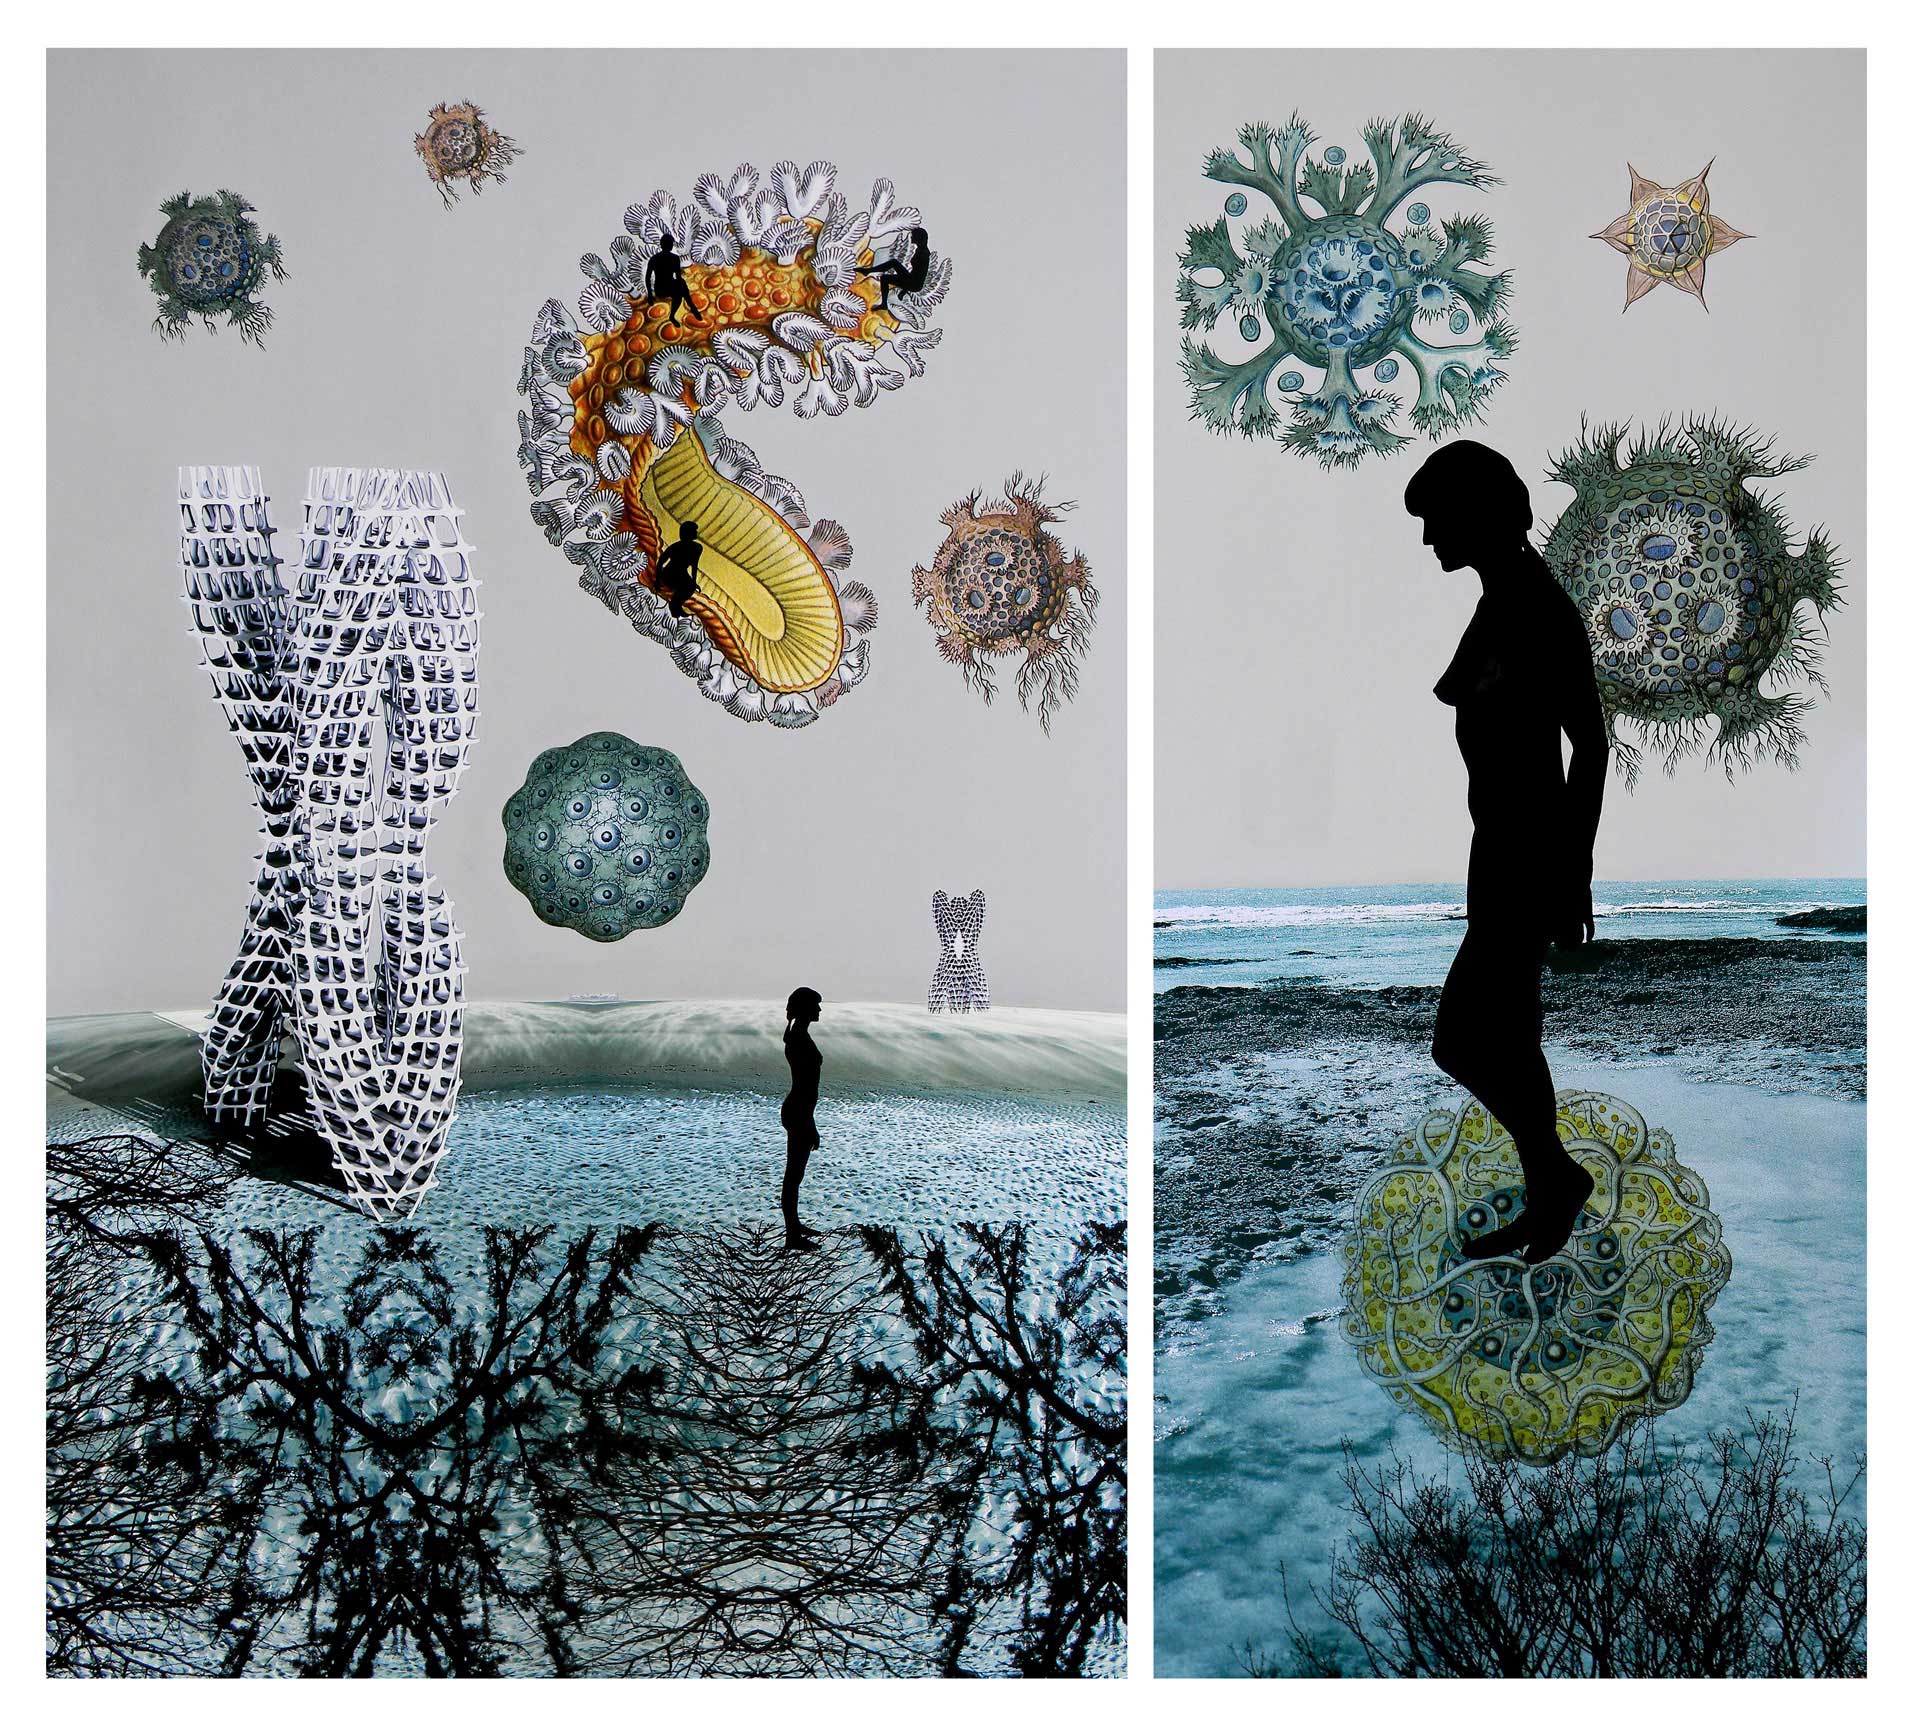 Sonia Mehra Chawla_Transitory Shores & Biomorphic Daydreams II_2013_Mixed media on archival canvas_182 x 204 cm (diptych)